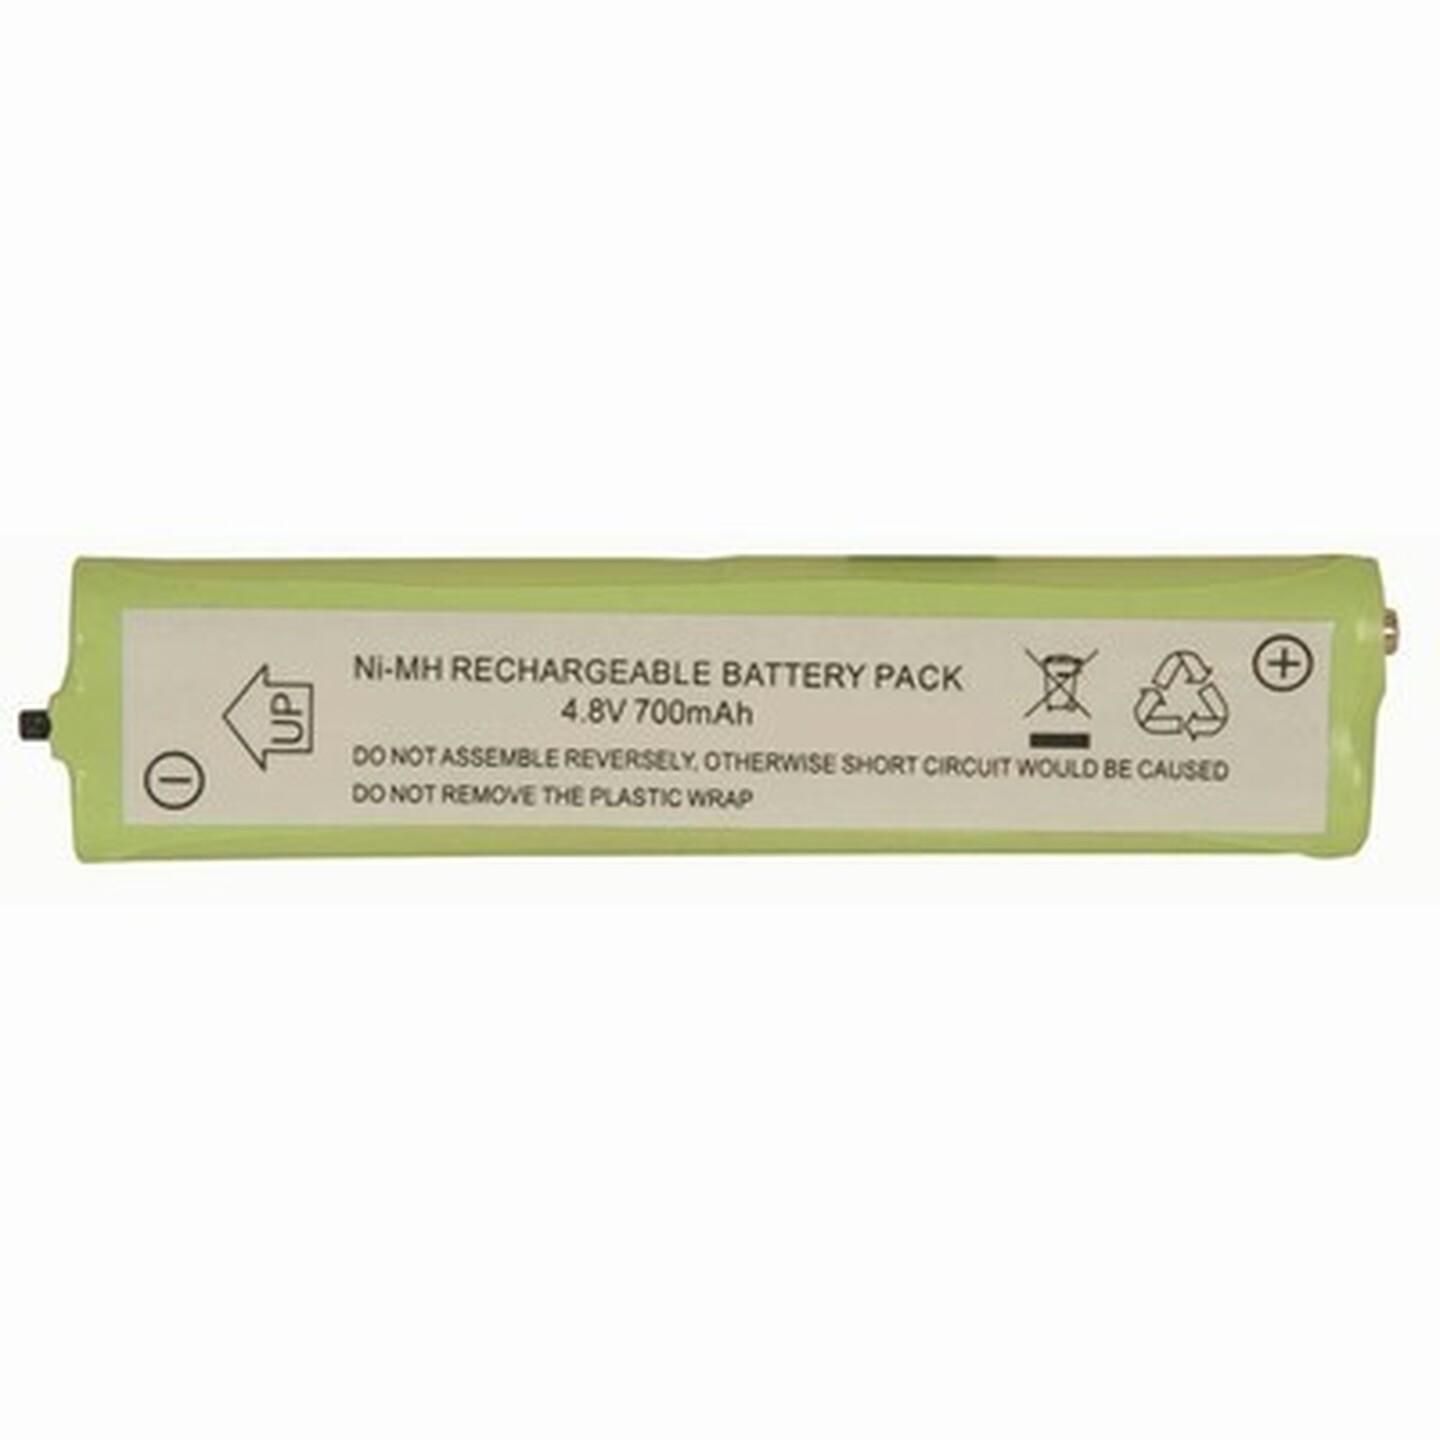 Replacement DC-1045 Ni-MH Battery